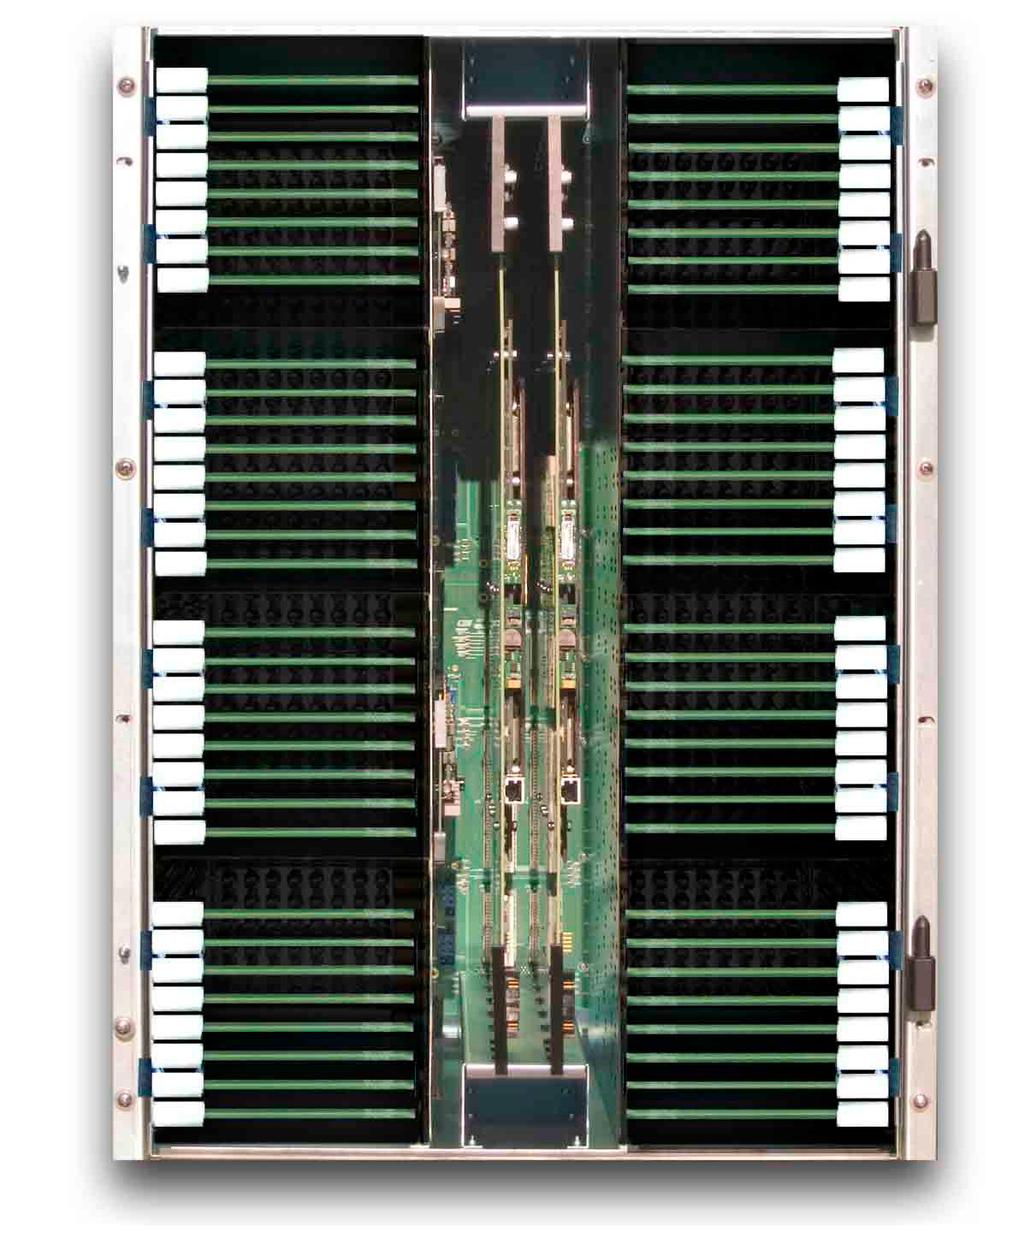 In addition, the UTAH-400/288 frame can be fitted with an optional Redundant Crosspoint Card that provides full backup against an internal path failure in the matrix.